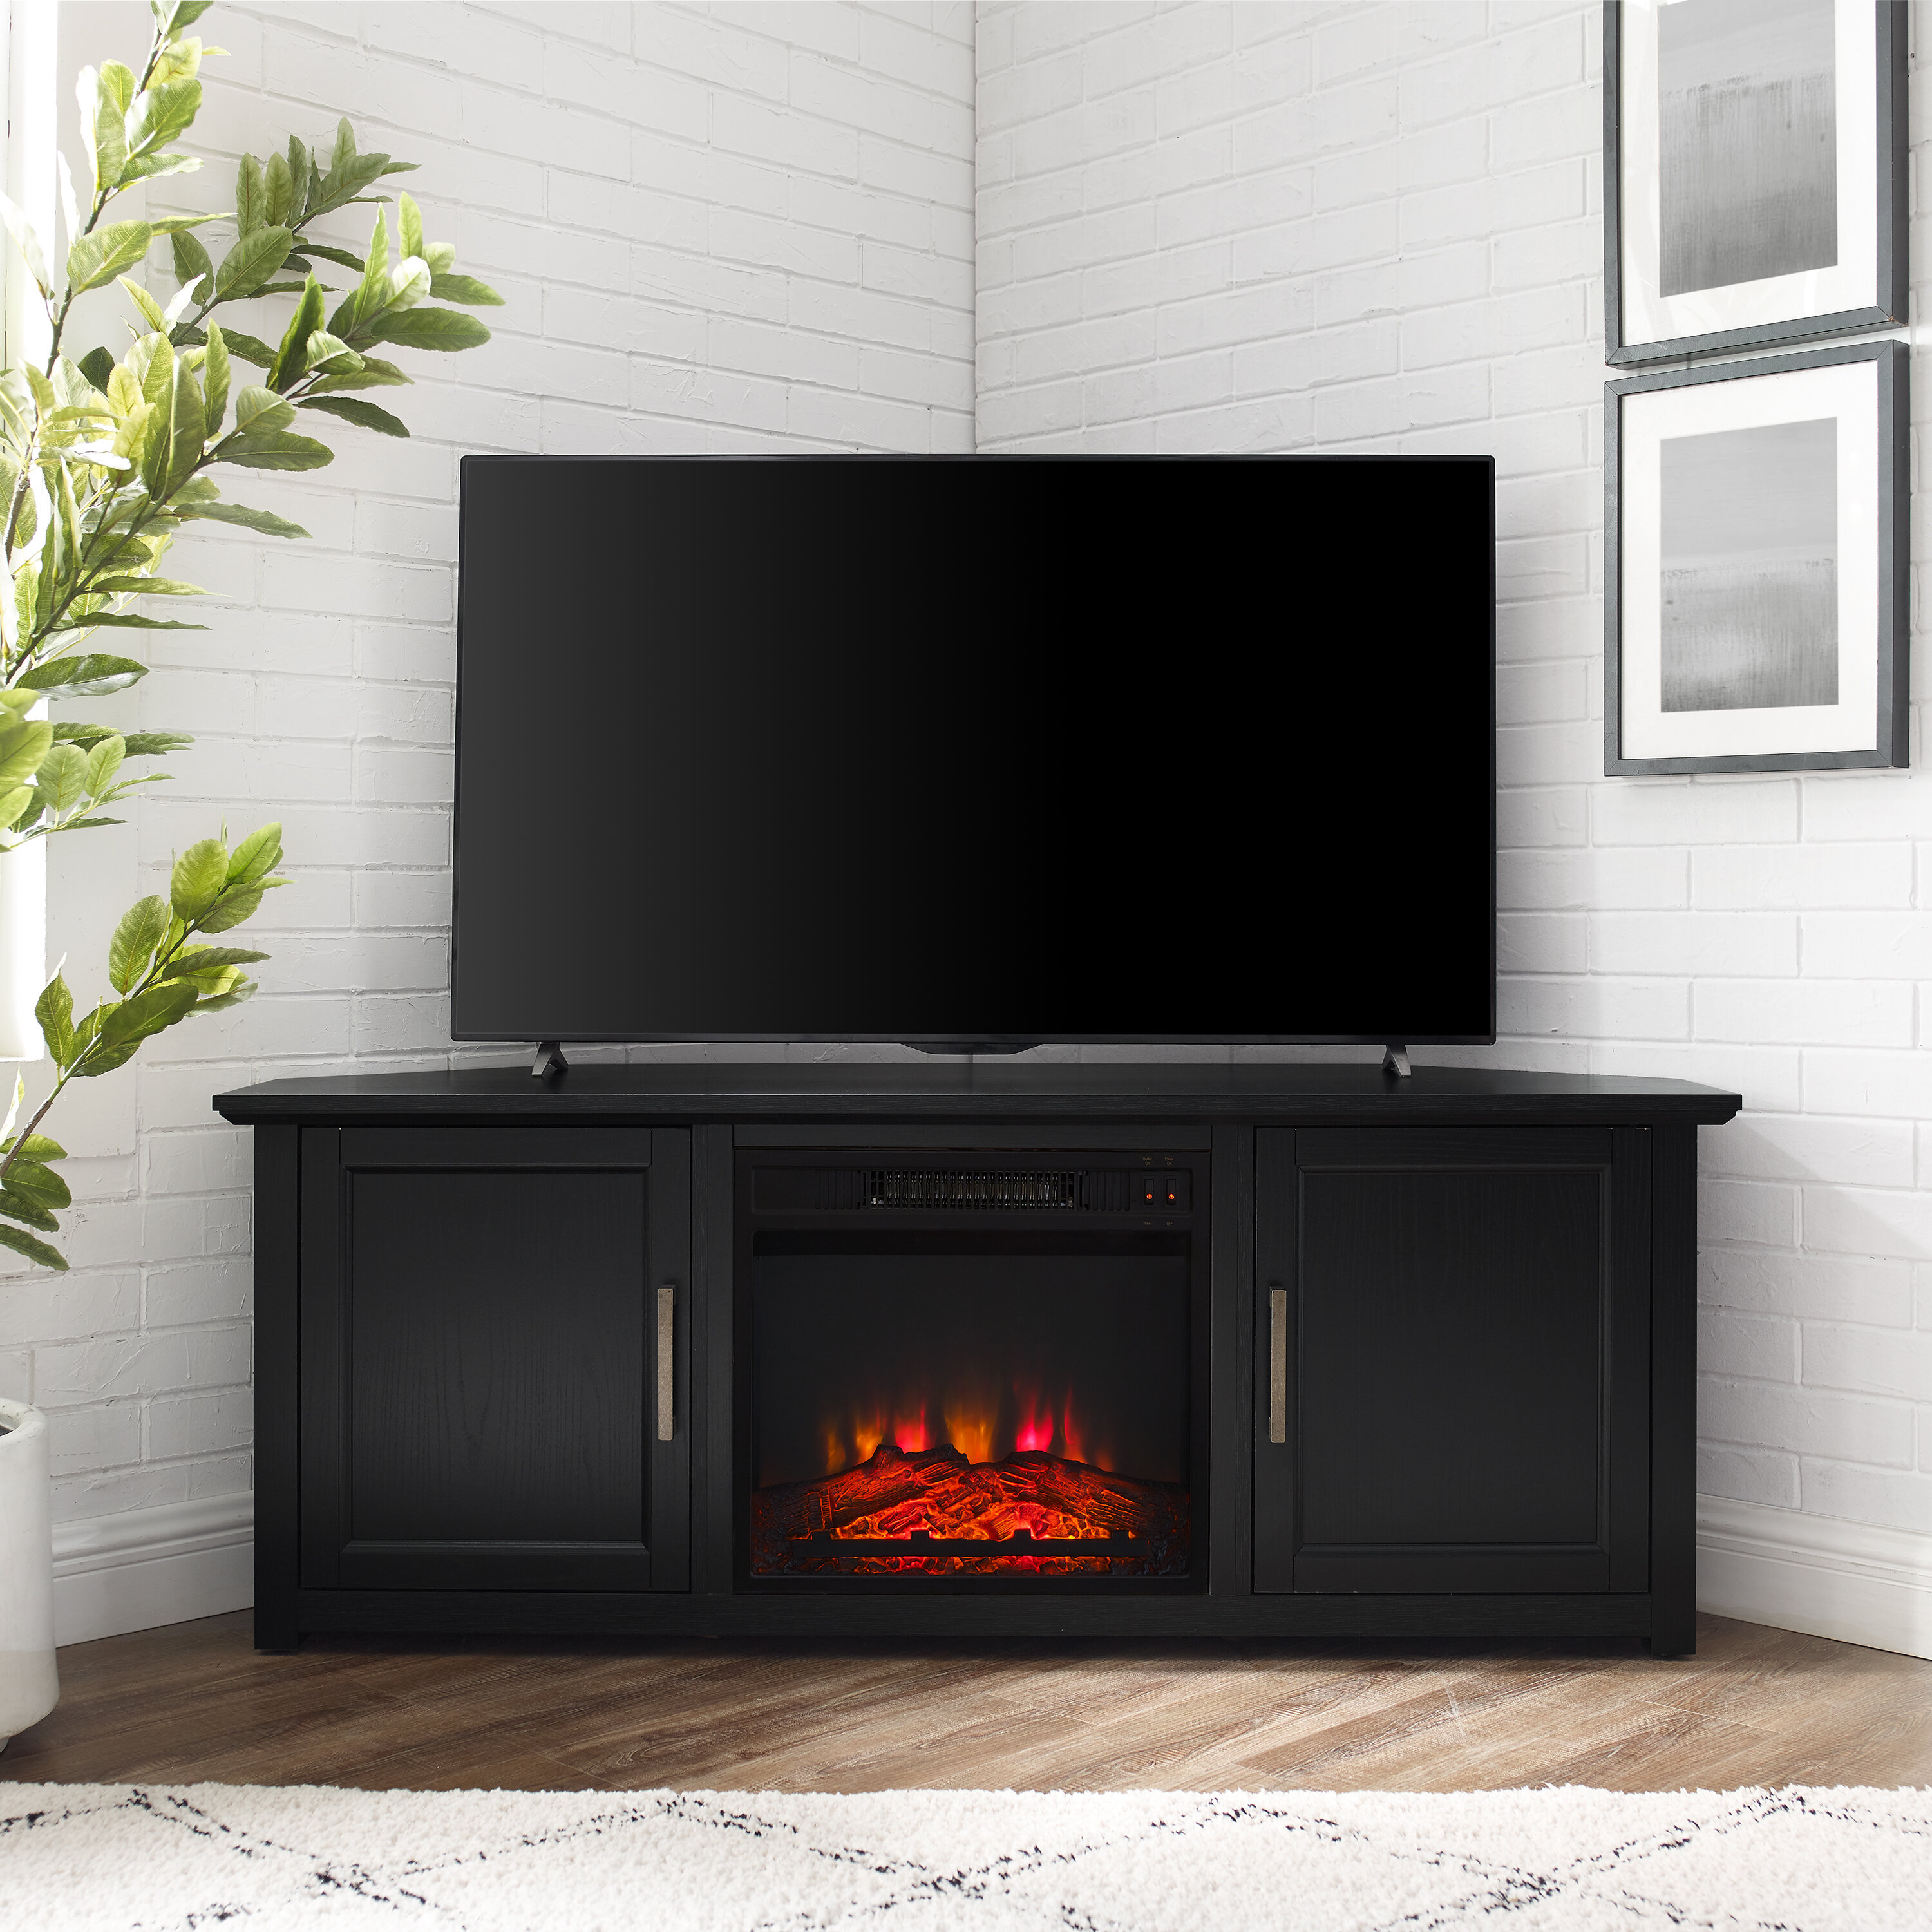 Three Posts Albrecht Tv Stand For Tvs Up To 60 With Fireplace Included Reviews Wayfair